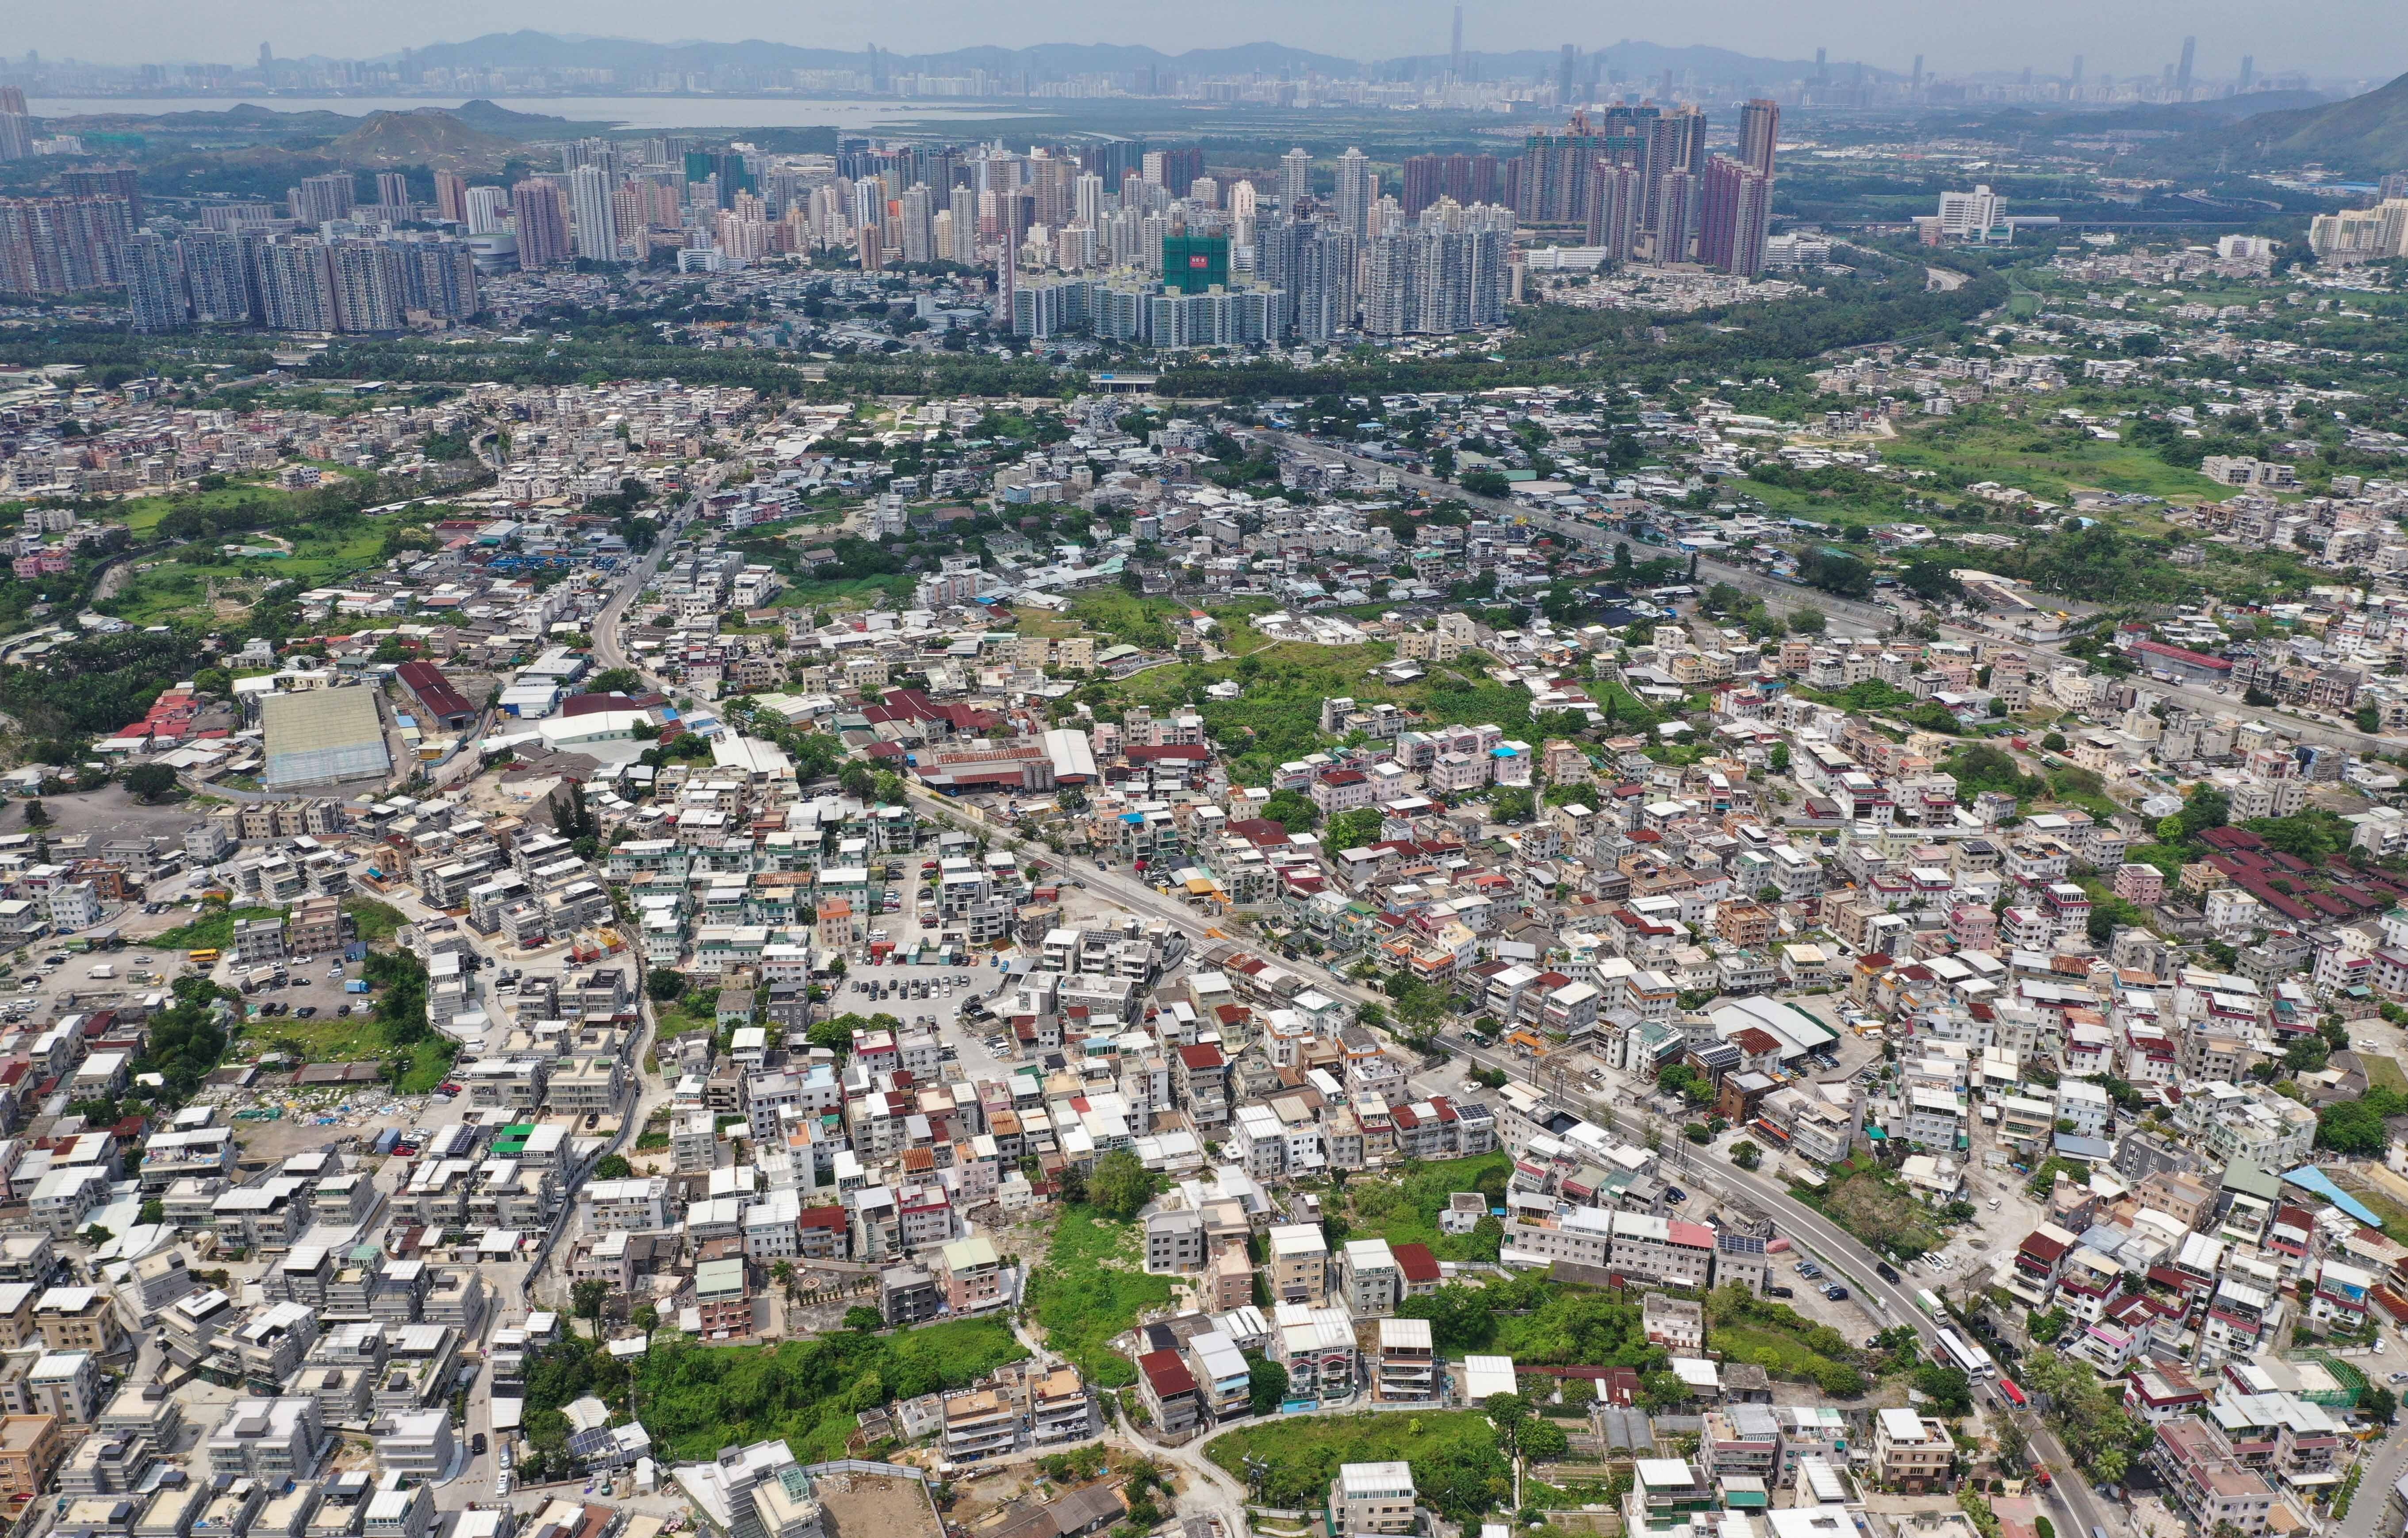 An aerial view of indigenous village houses in the New Territories. Photo: Winson Wong